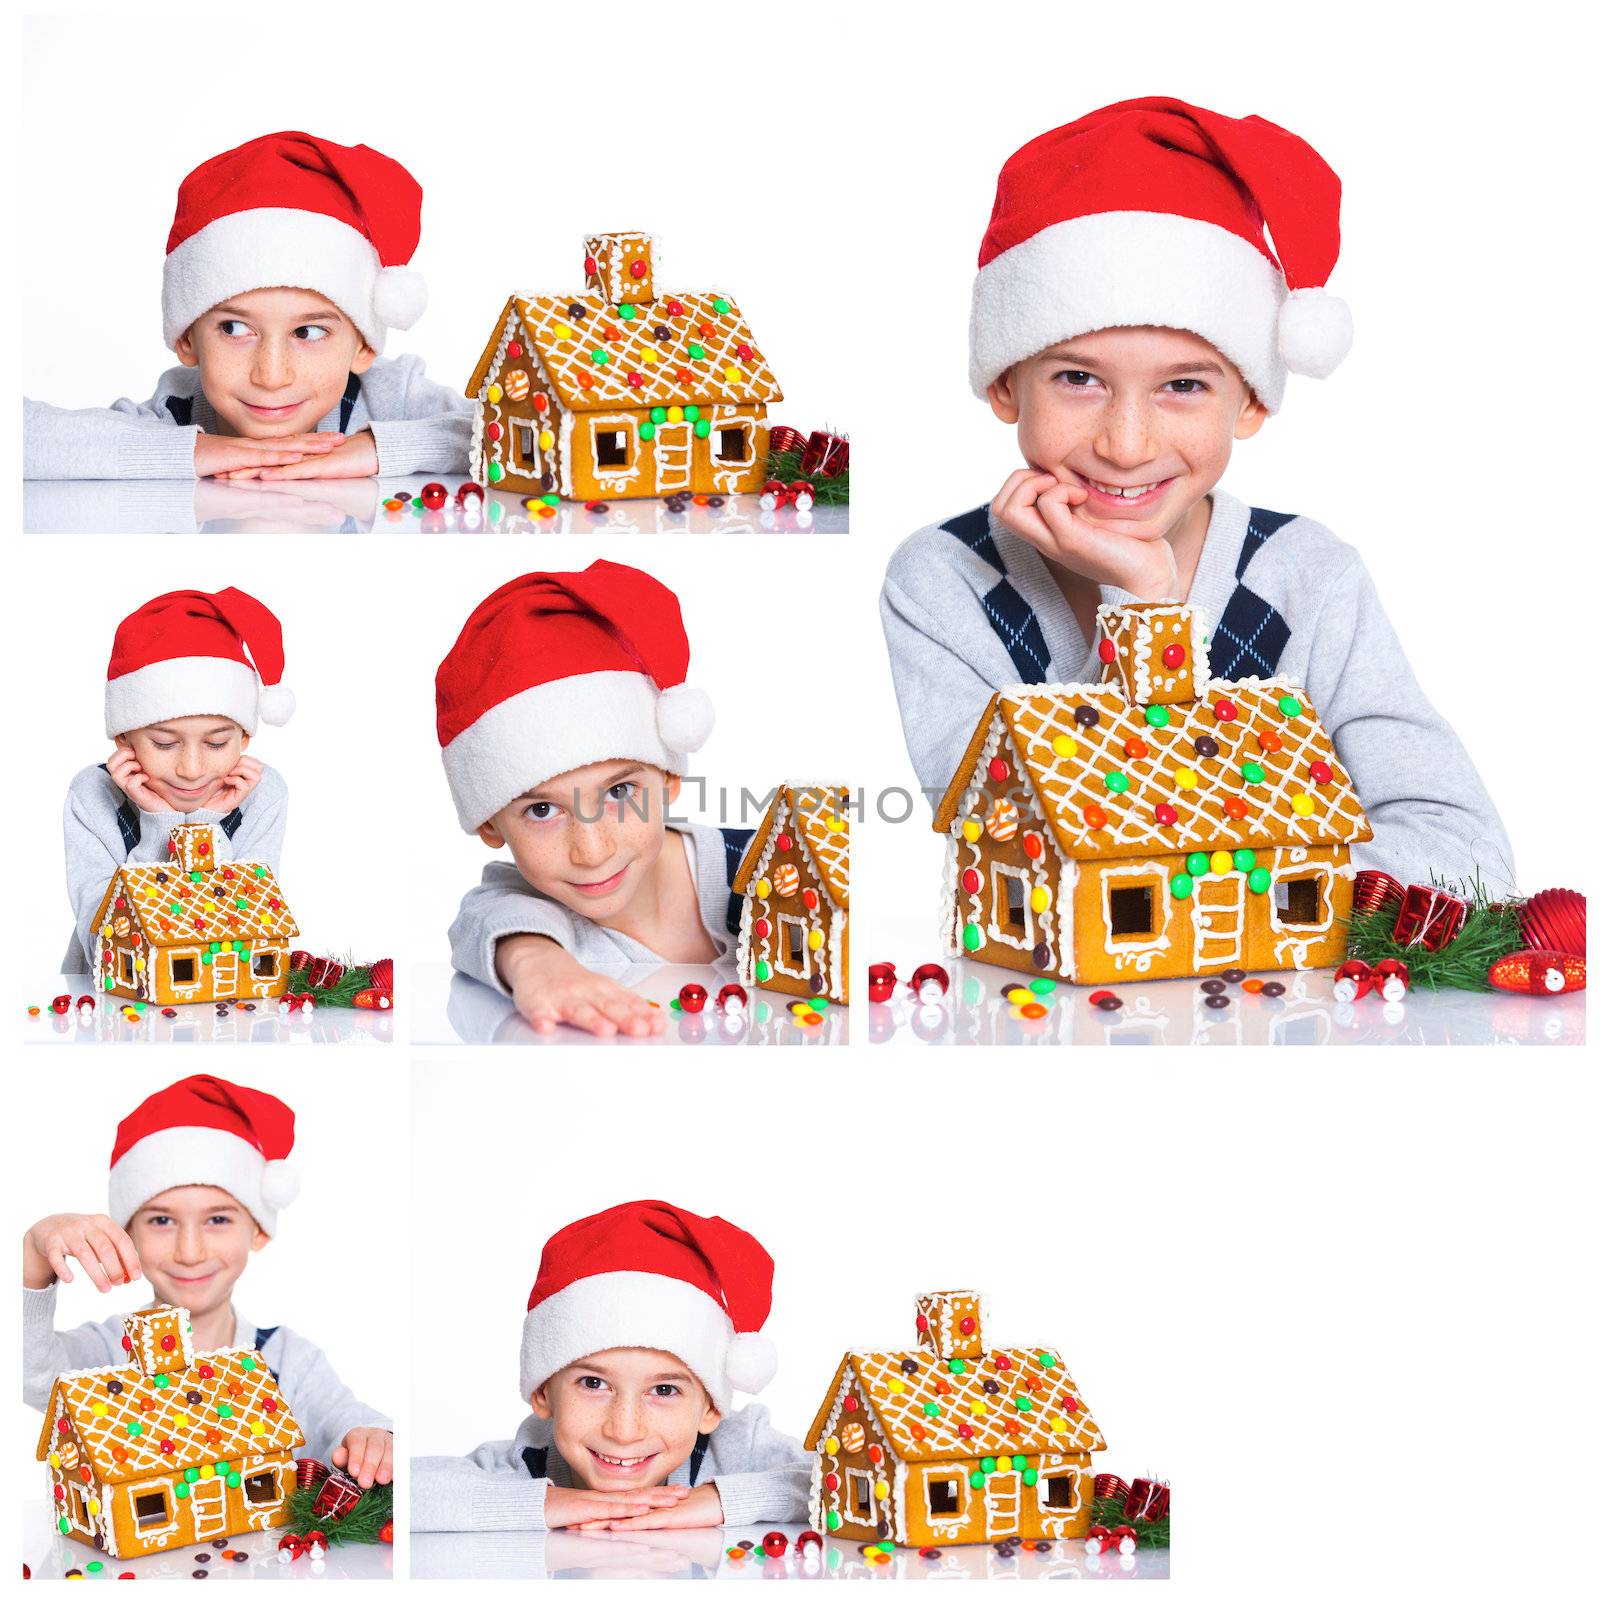 Christmas theme. Collage of images smiling boy in Santa's hat with gingerbread house, isolated on white